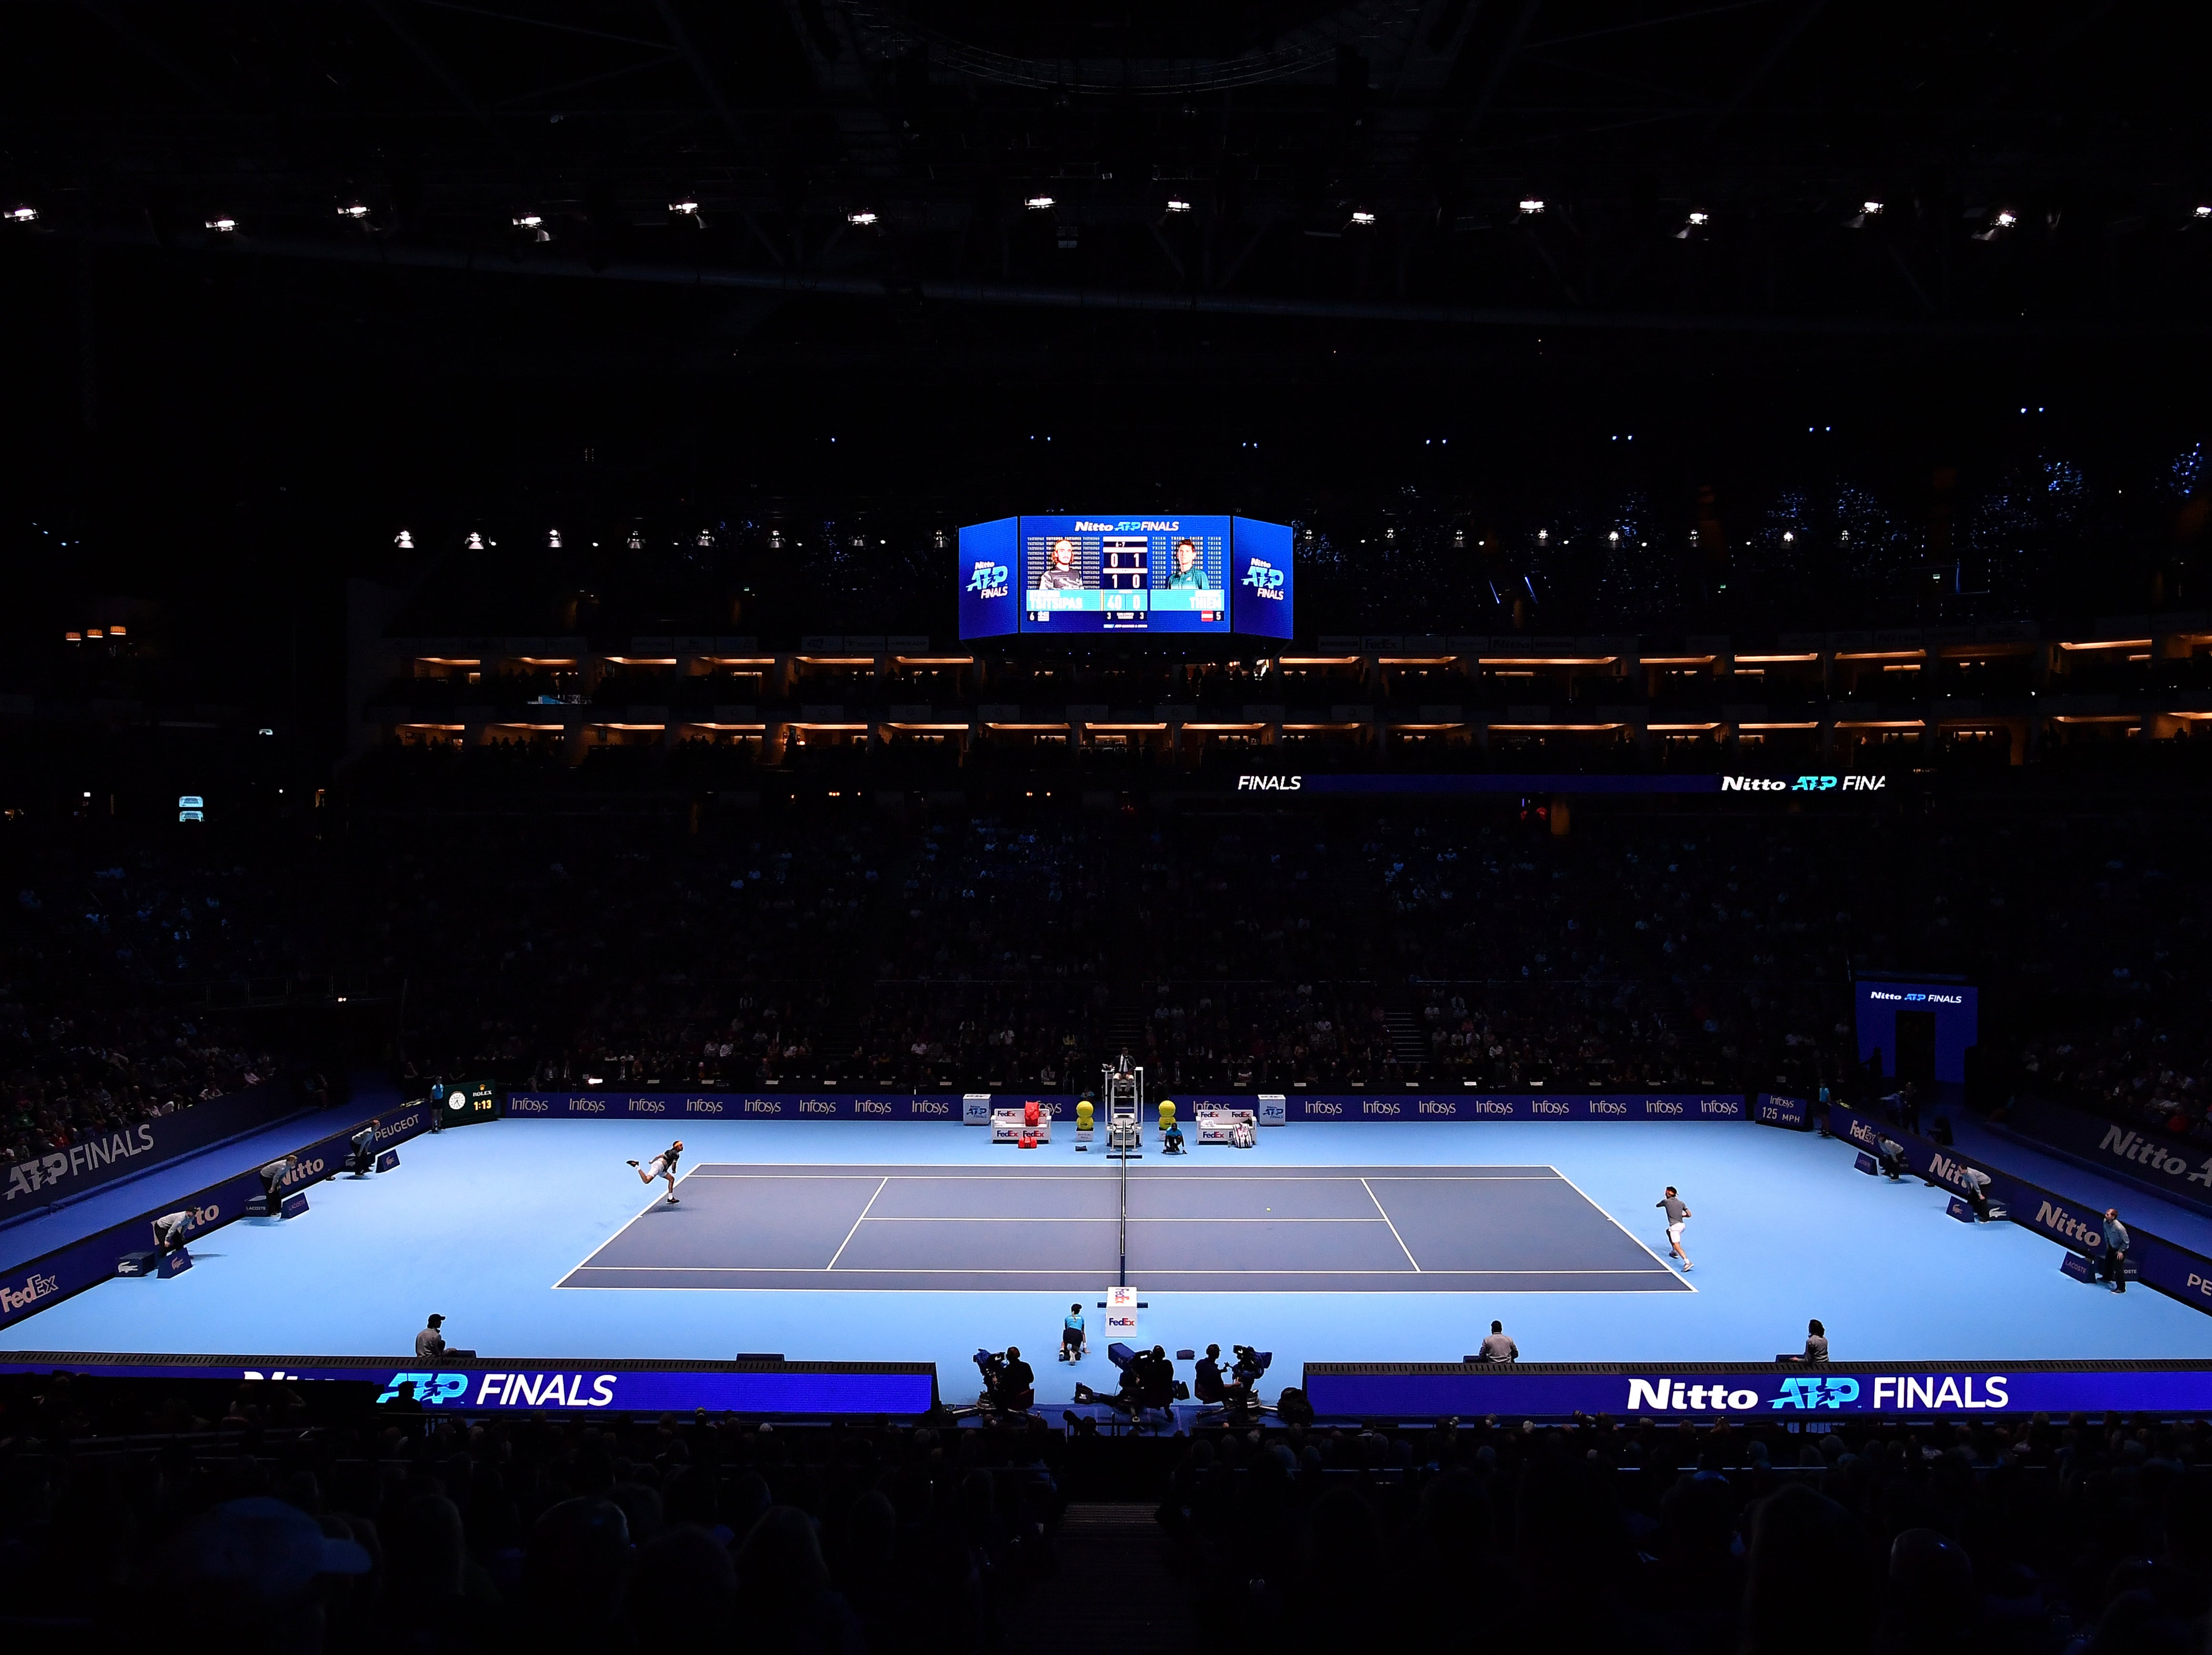 Where can I watch Nitto ATP Finals 2020 on TV and online? The Independent